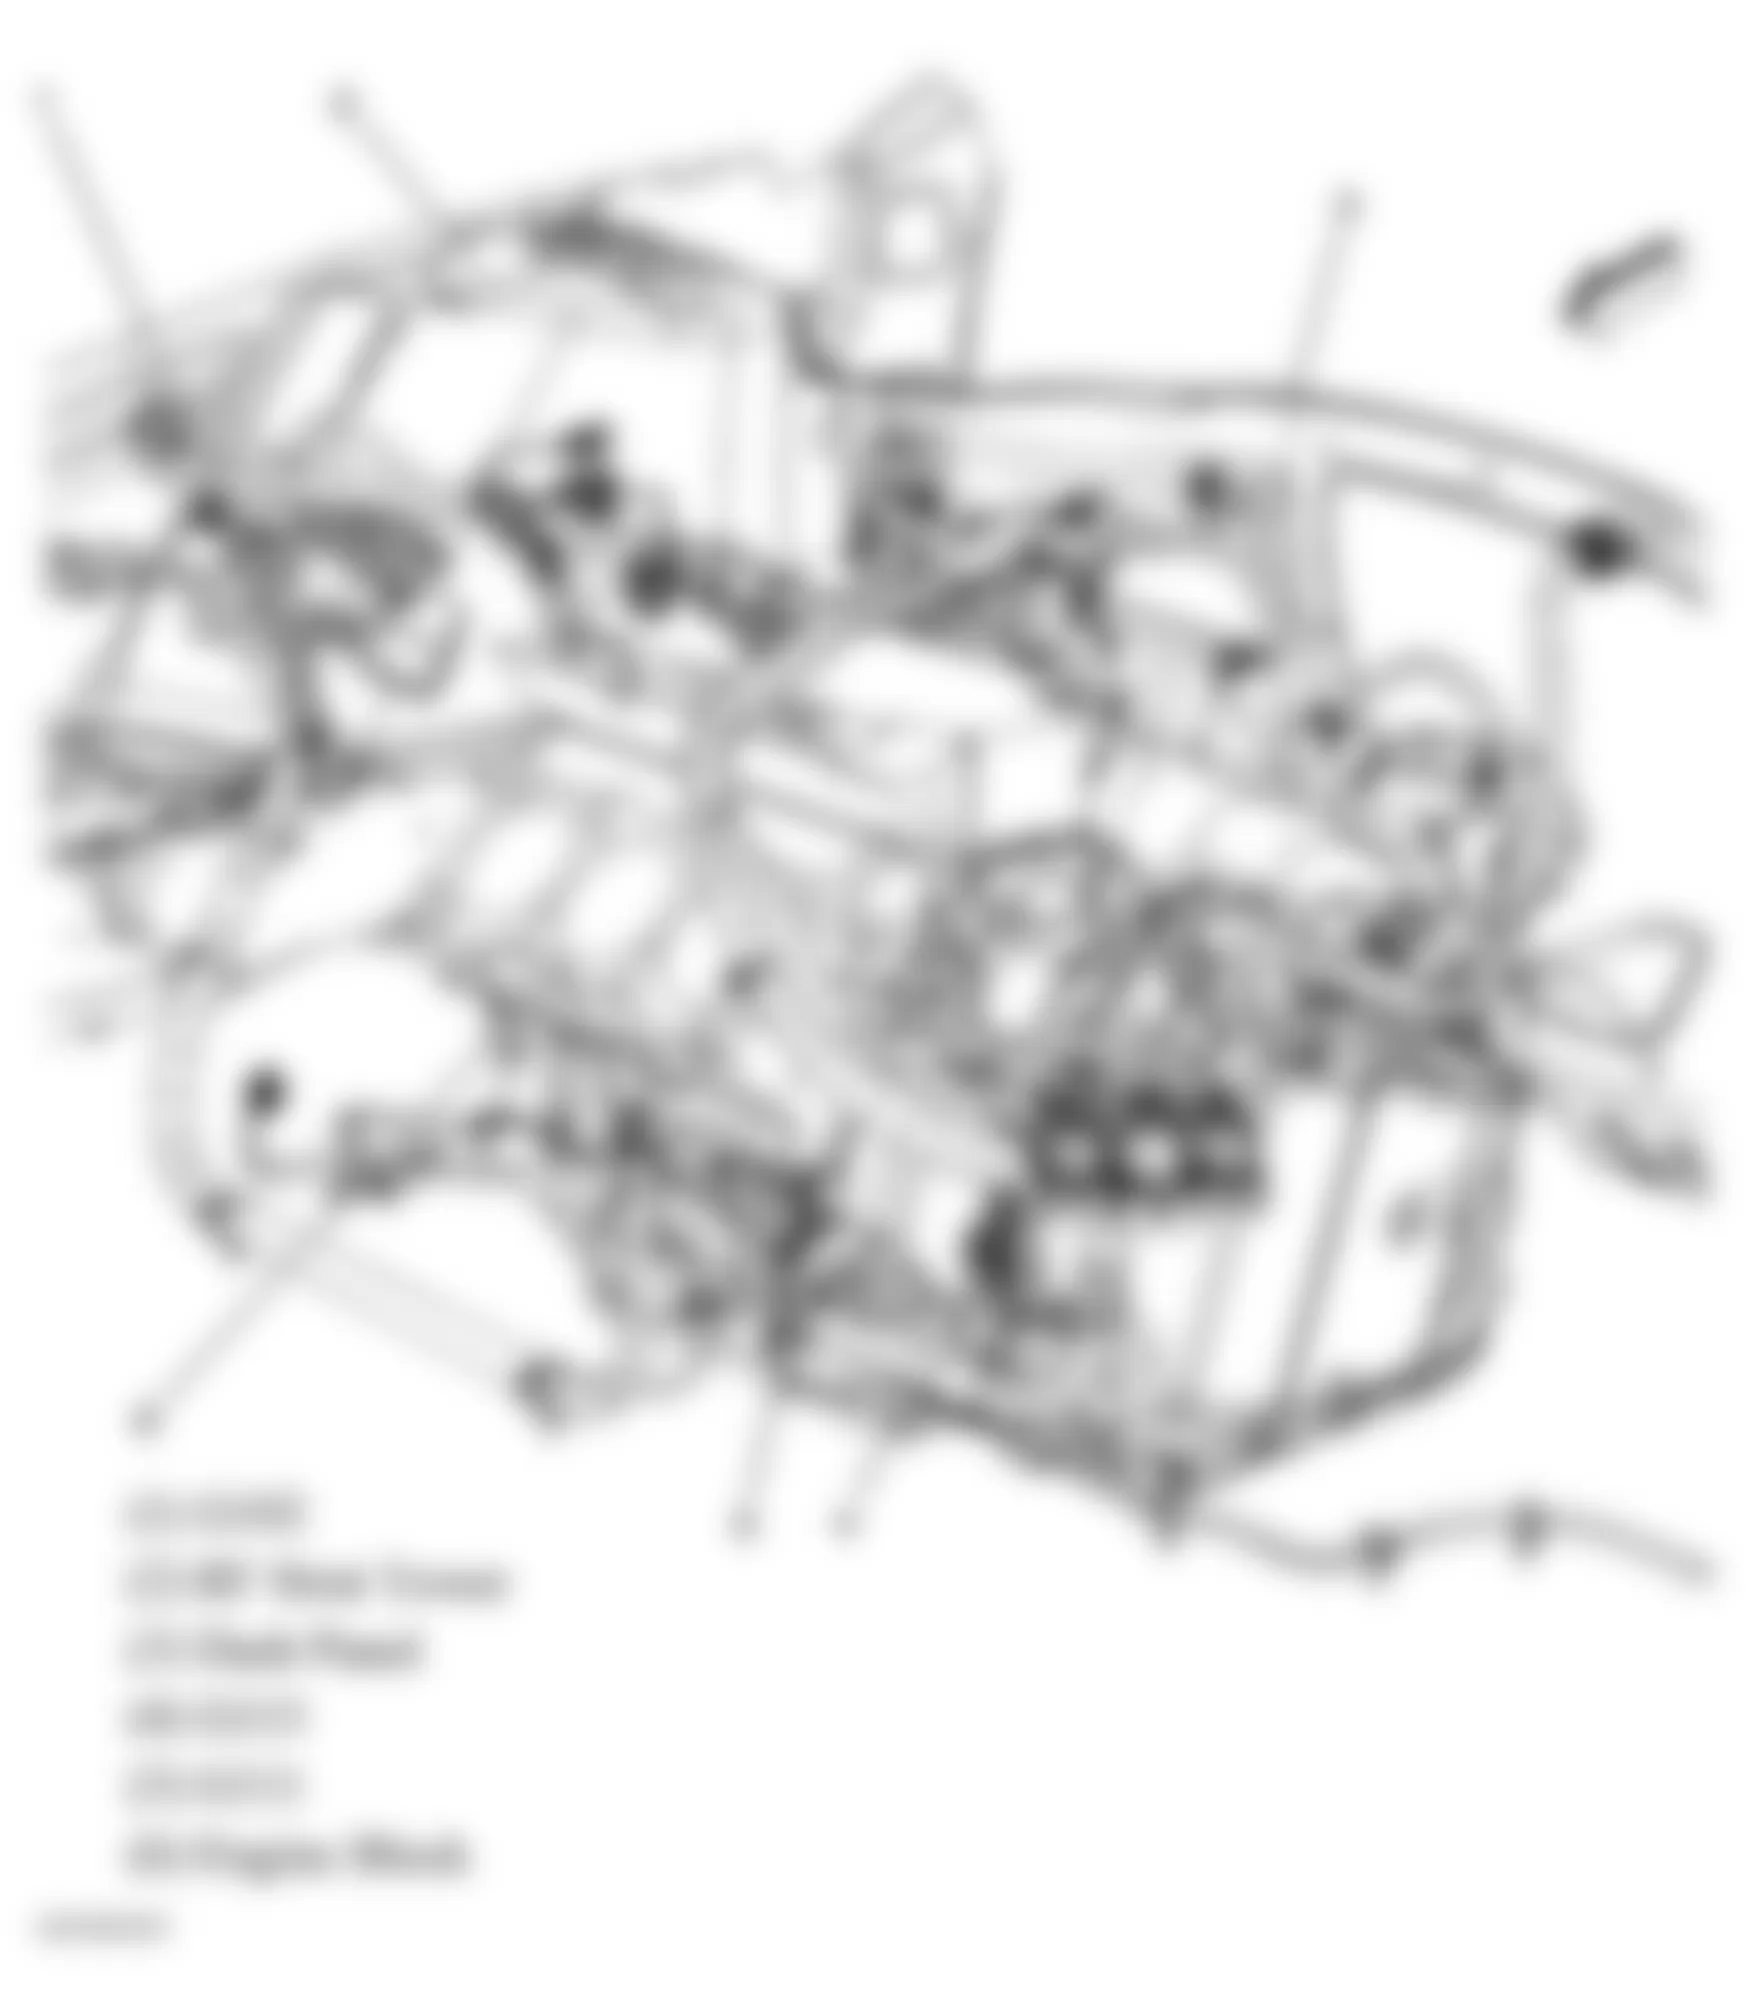 Buick Allure CXL 2006 - Component Locations -  Engine/Transmission Assembly